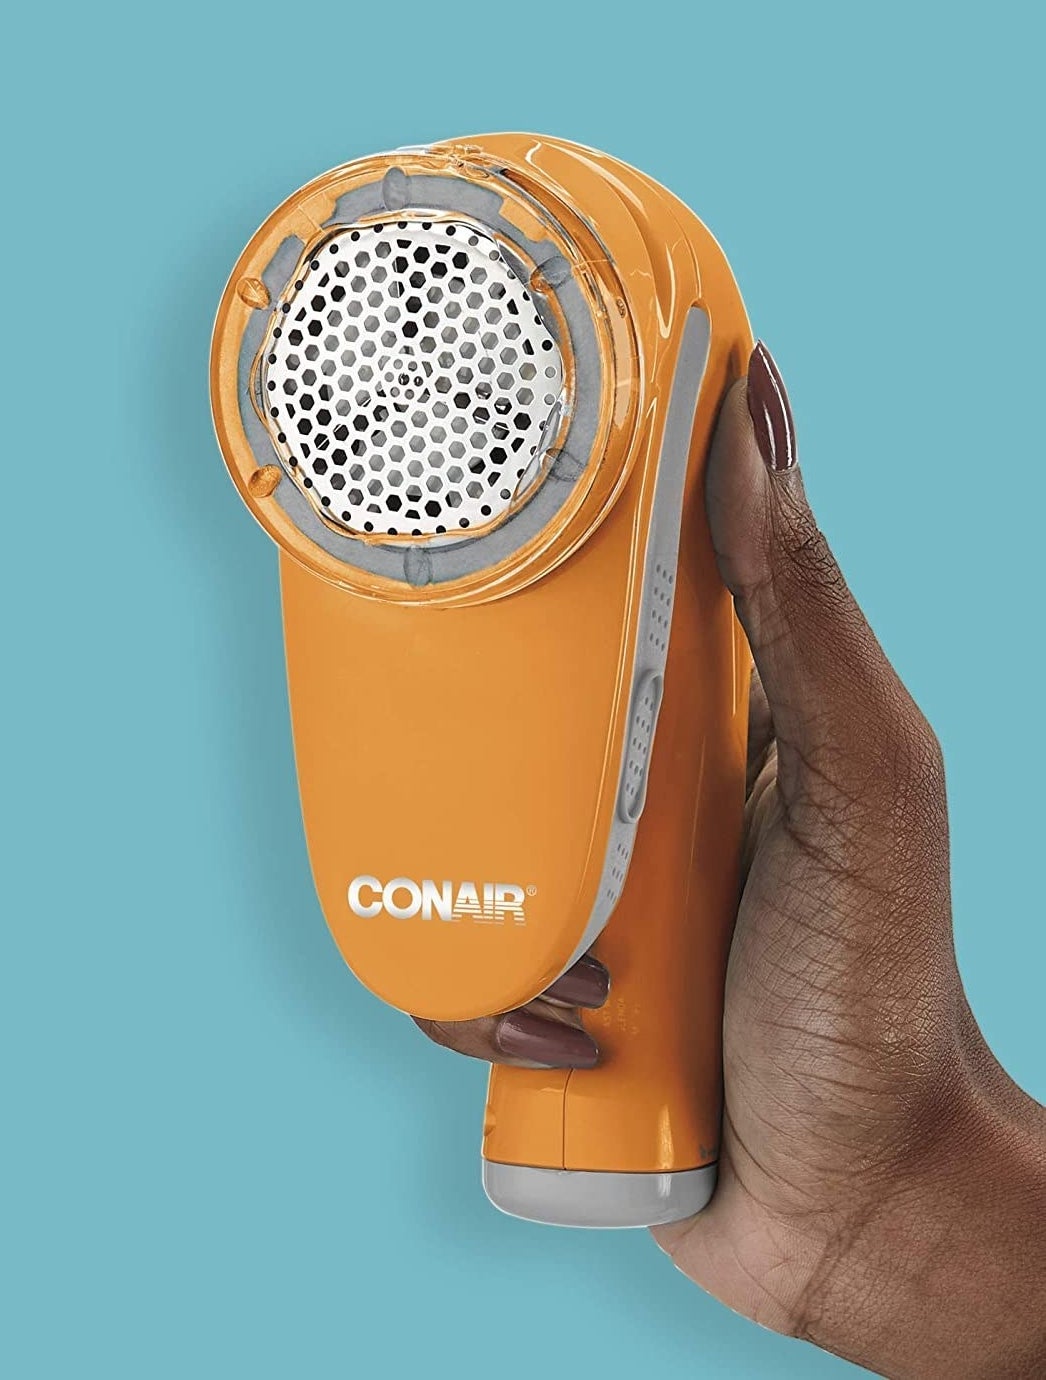 A person showing the face of the fabric shaver